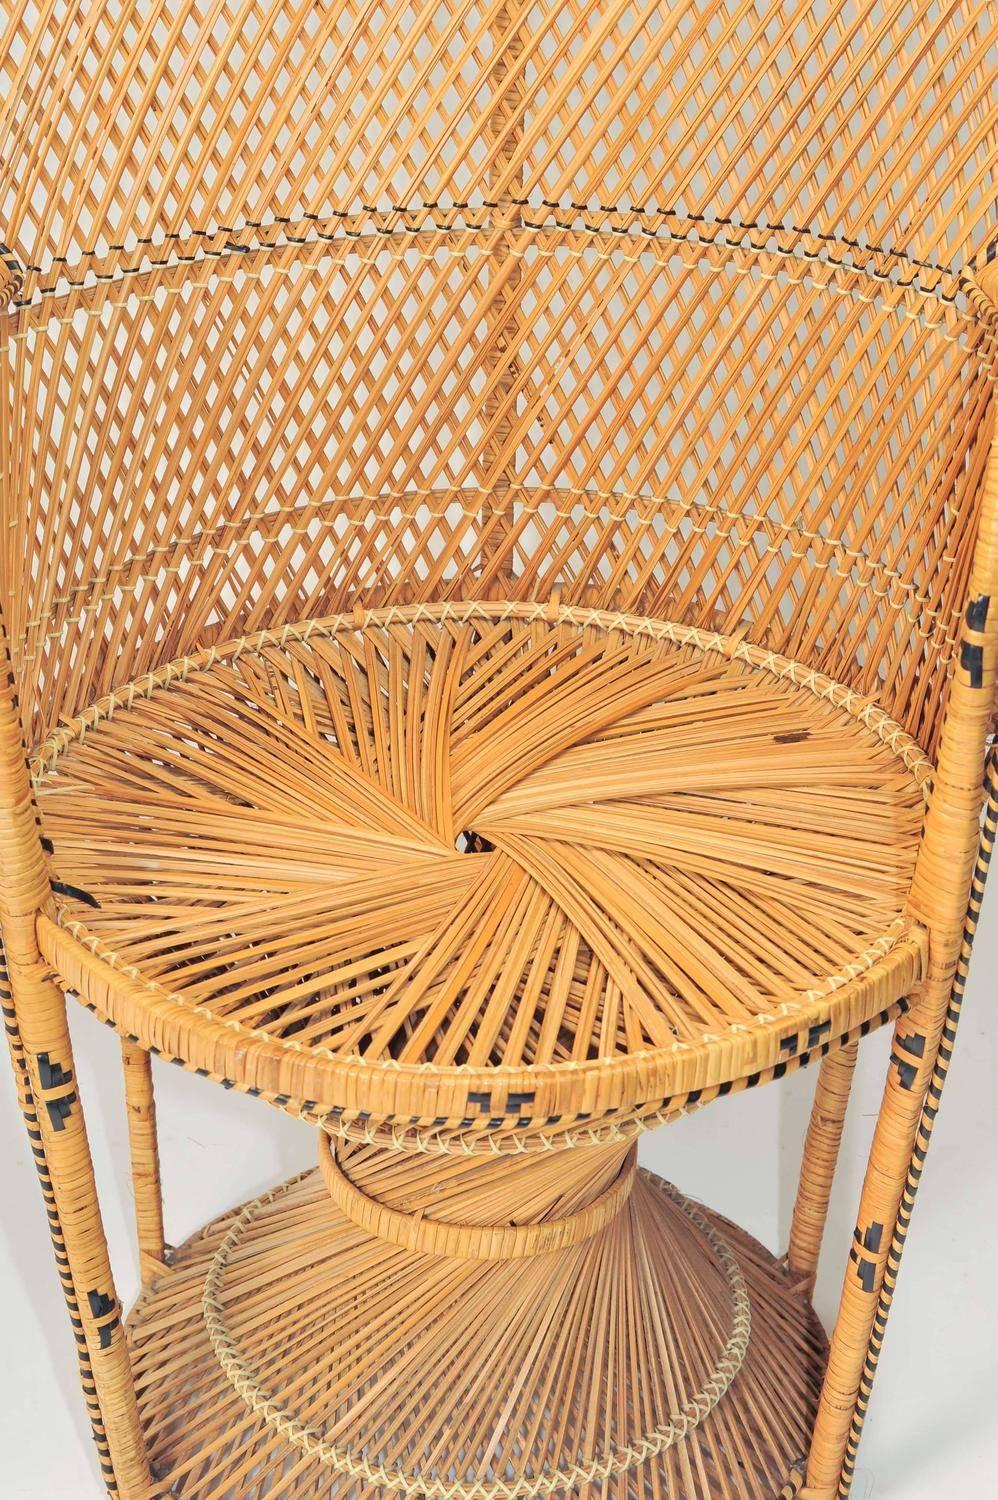 Iconic Emmanuelle chair midcentury, rattan peacock chair with seating cushion included.